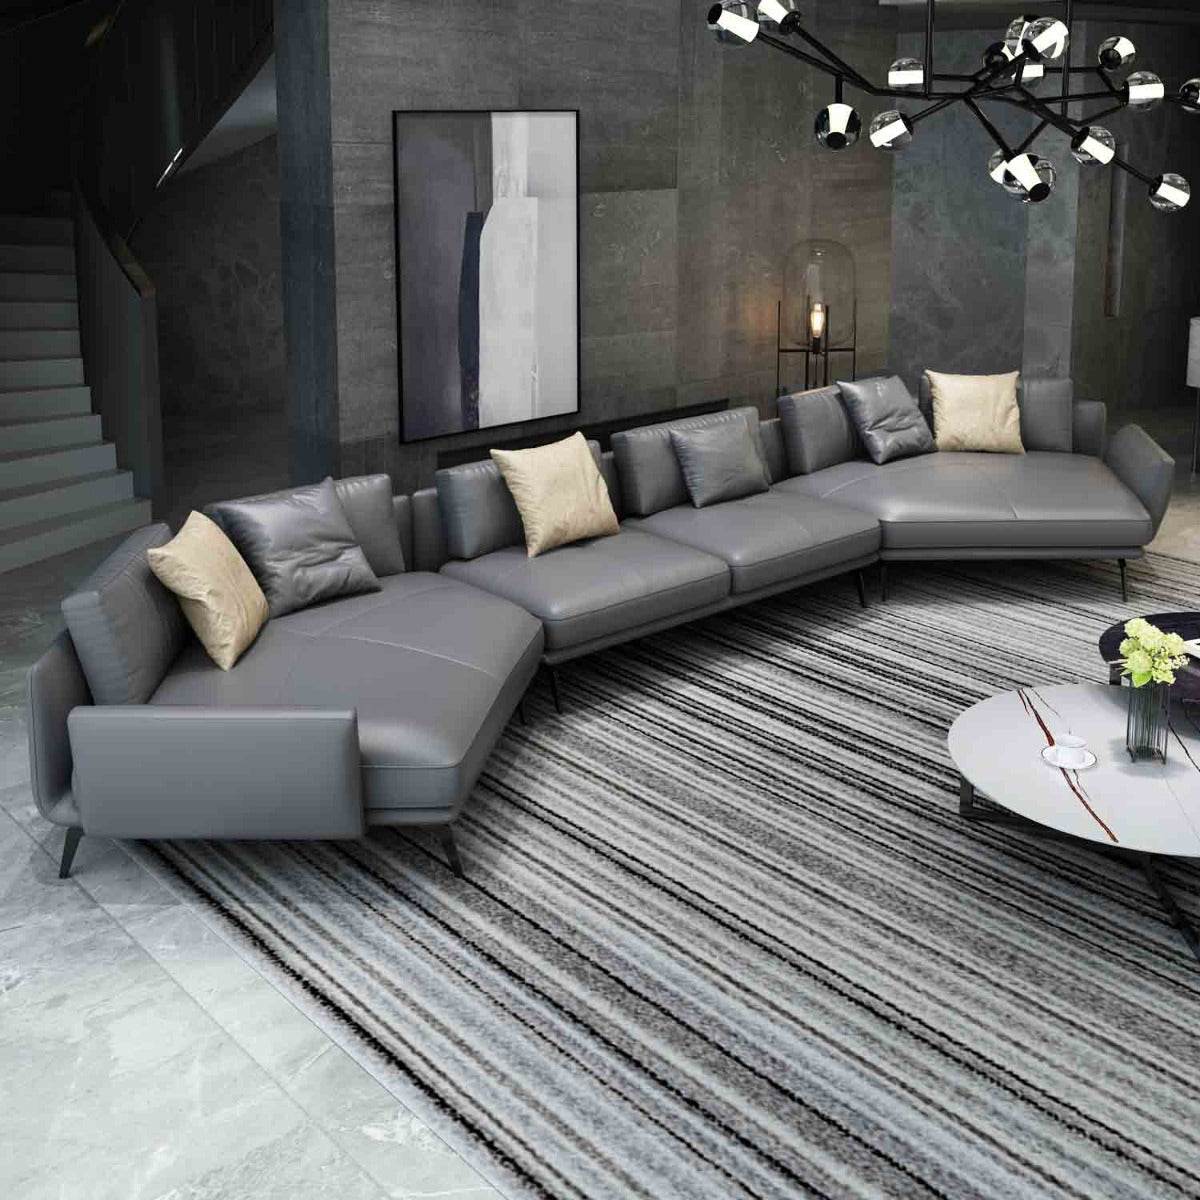 European Furniture - Venere 6 Seater Sectional in Smokey Grey - 65553-6S - New Star Living